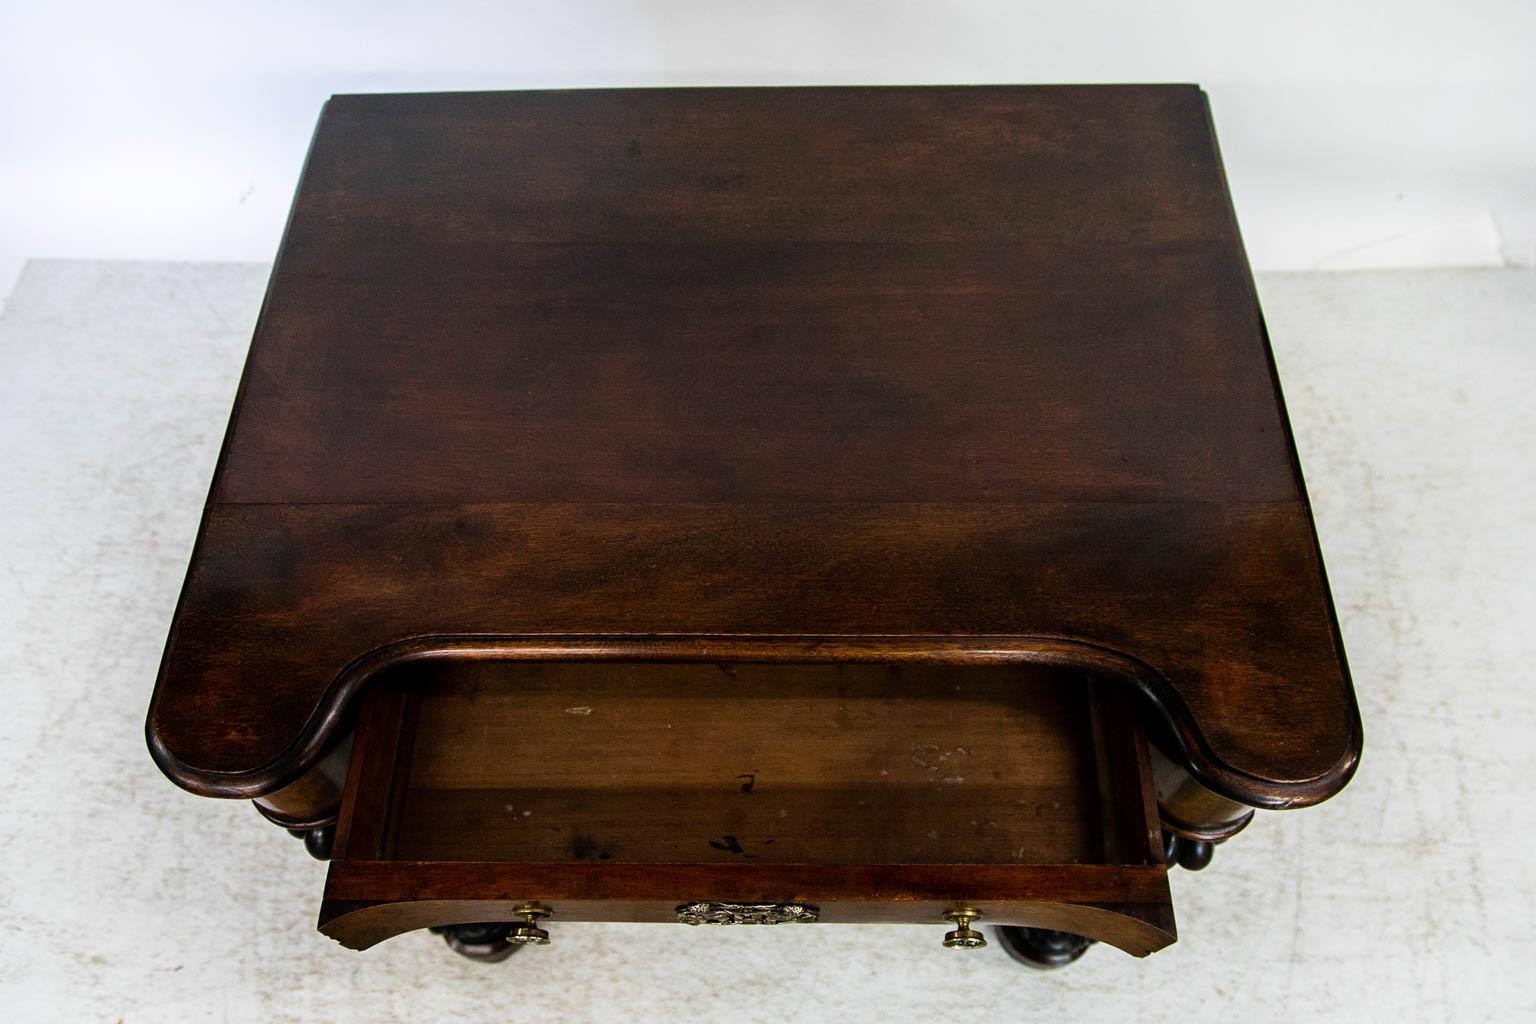 The top of this side table is solid mahogany. The corners curve out to meet the carved support columns. The drawer front and apron extend all the way around to the back. It was made with highly figured burled walnut. The bullnose molding follows the